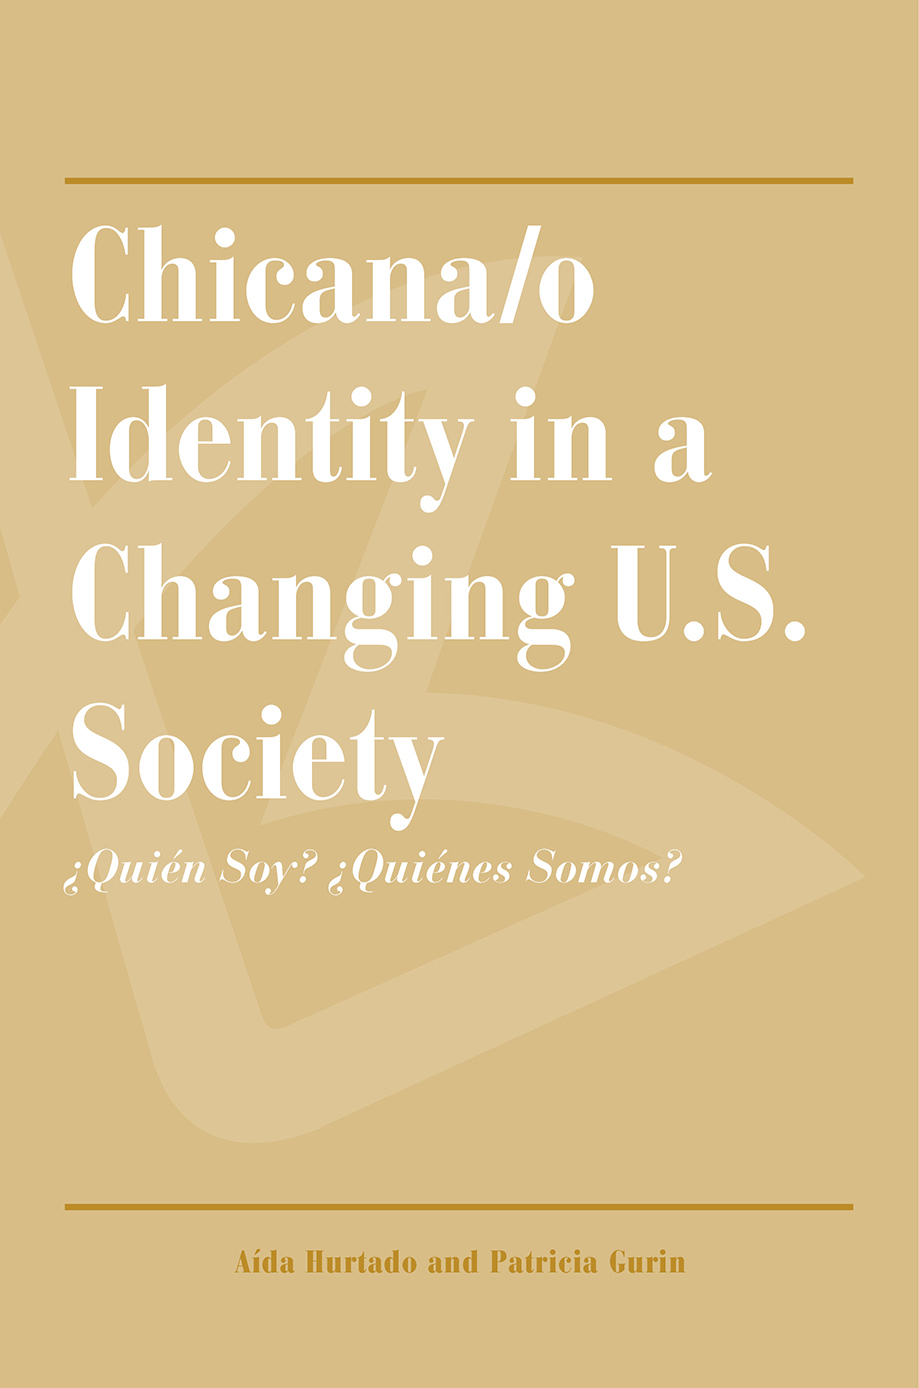 Chicana/o Identity in a Changing U.S. Society